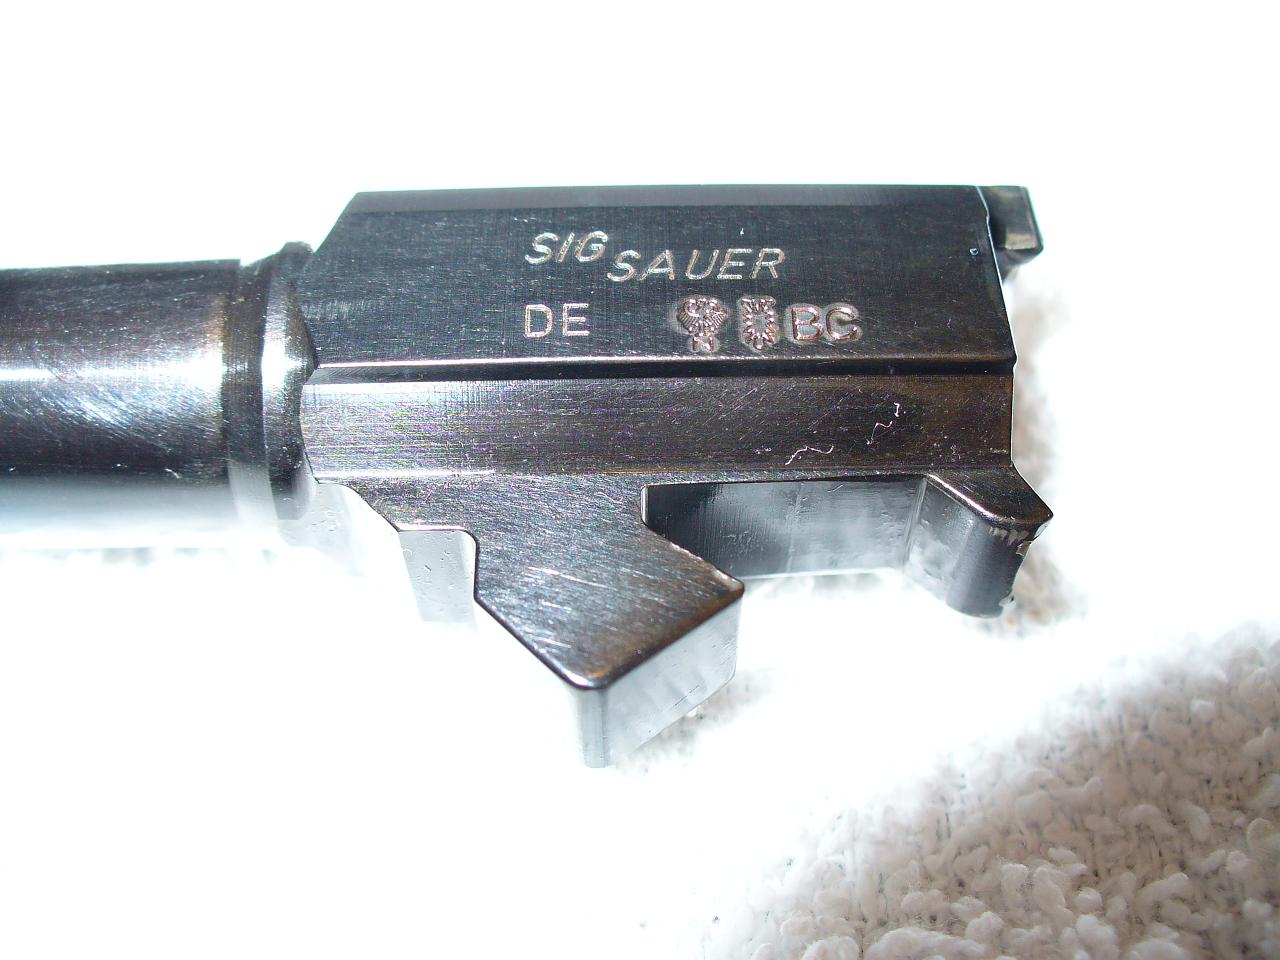 SIG P220 proofed barrel with a BC (2012) date code